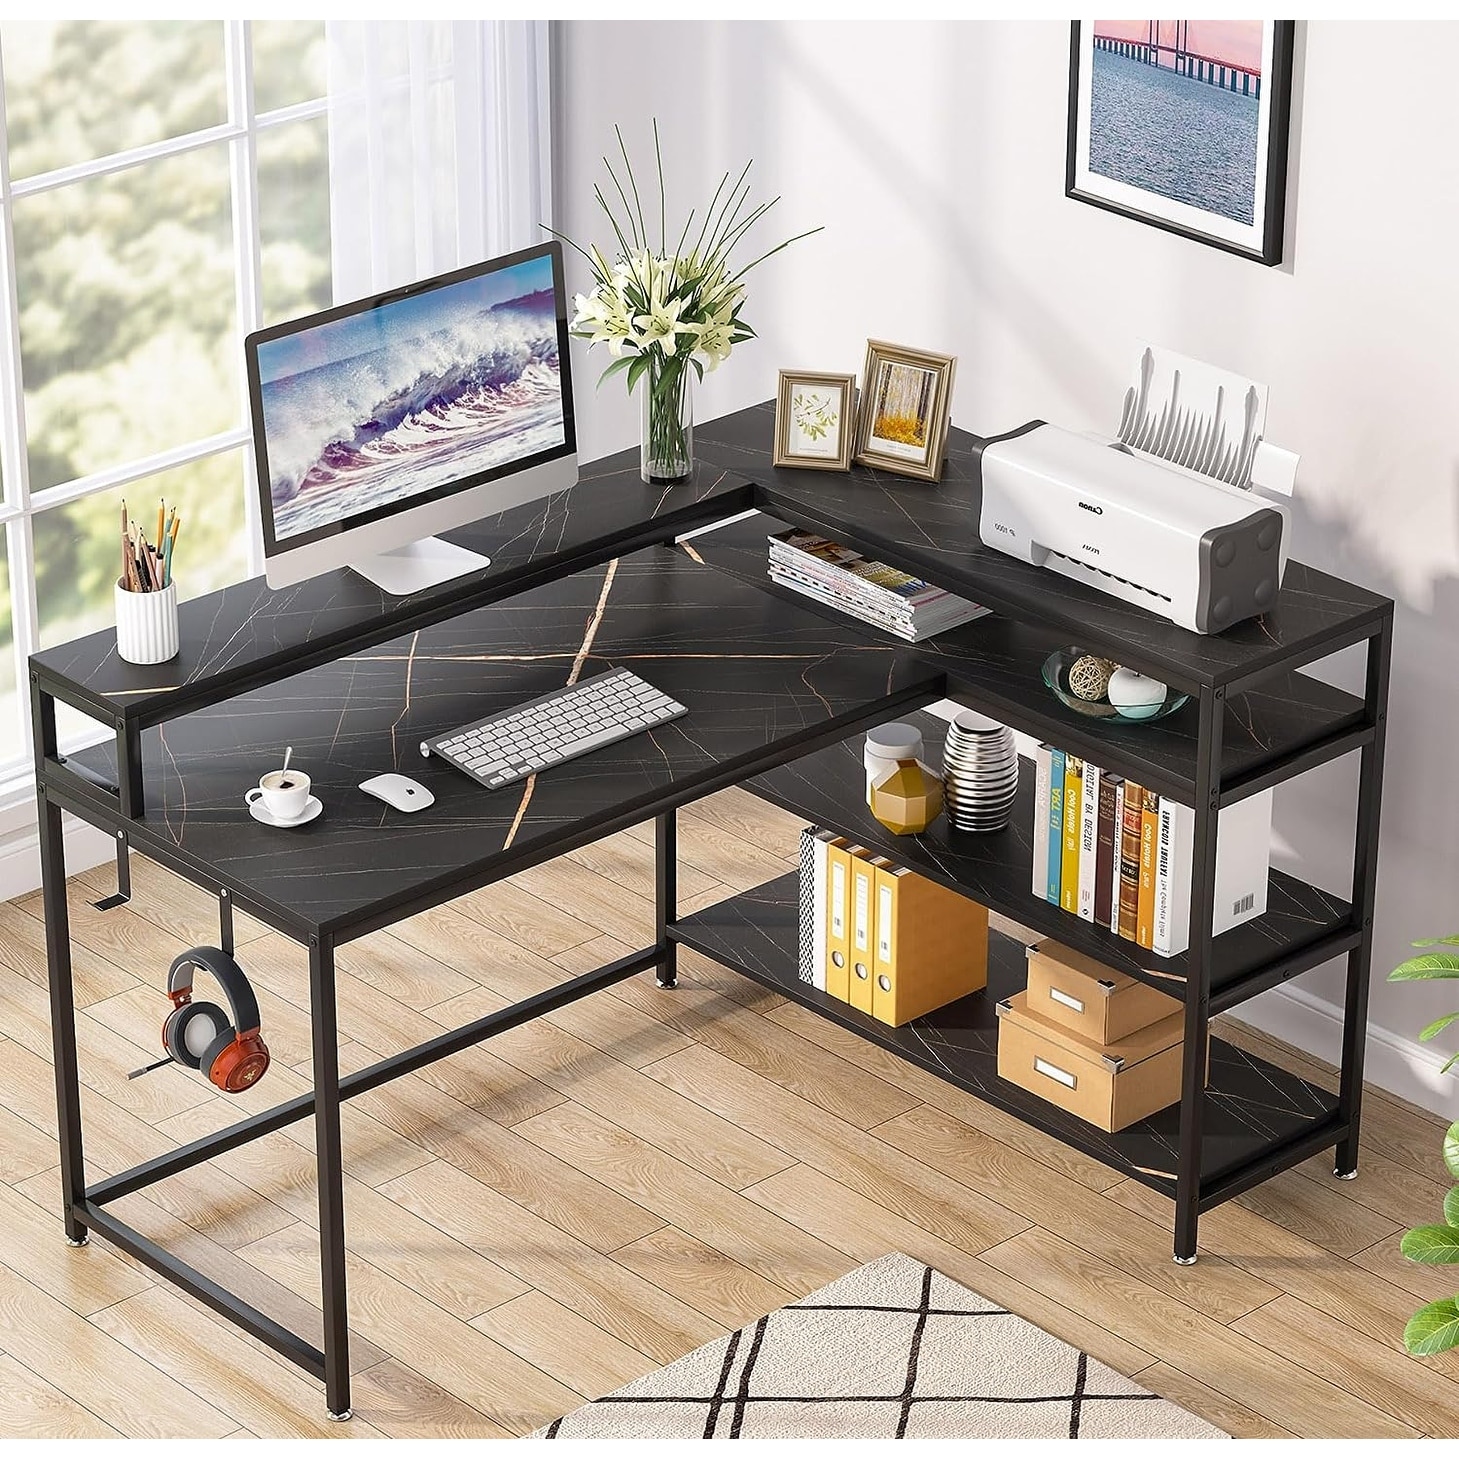 https://ak1.ostkcdn.com/images/products/is/images/direct/2c1f456485bb8dbd48a74832391c58dafee56624/55-53-inch-Reversible-L-Shaped-Desk-with-Storage-Shelf-and-Monitor-Stand%2CCorner-Desk.jpg